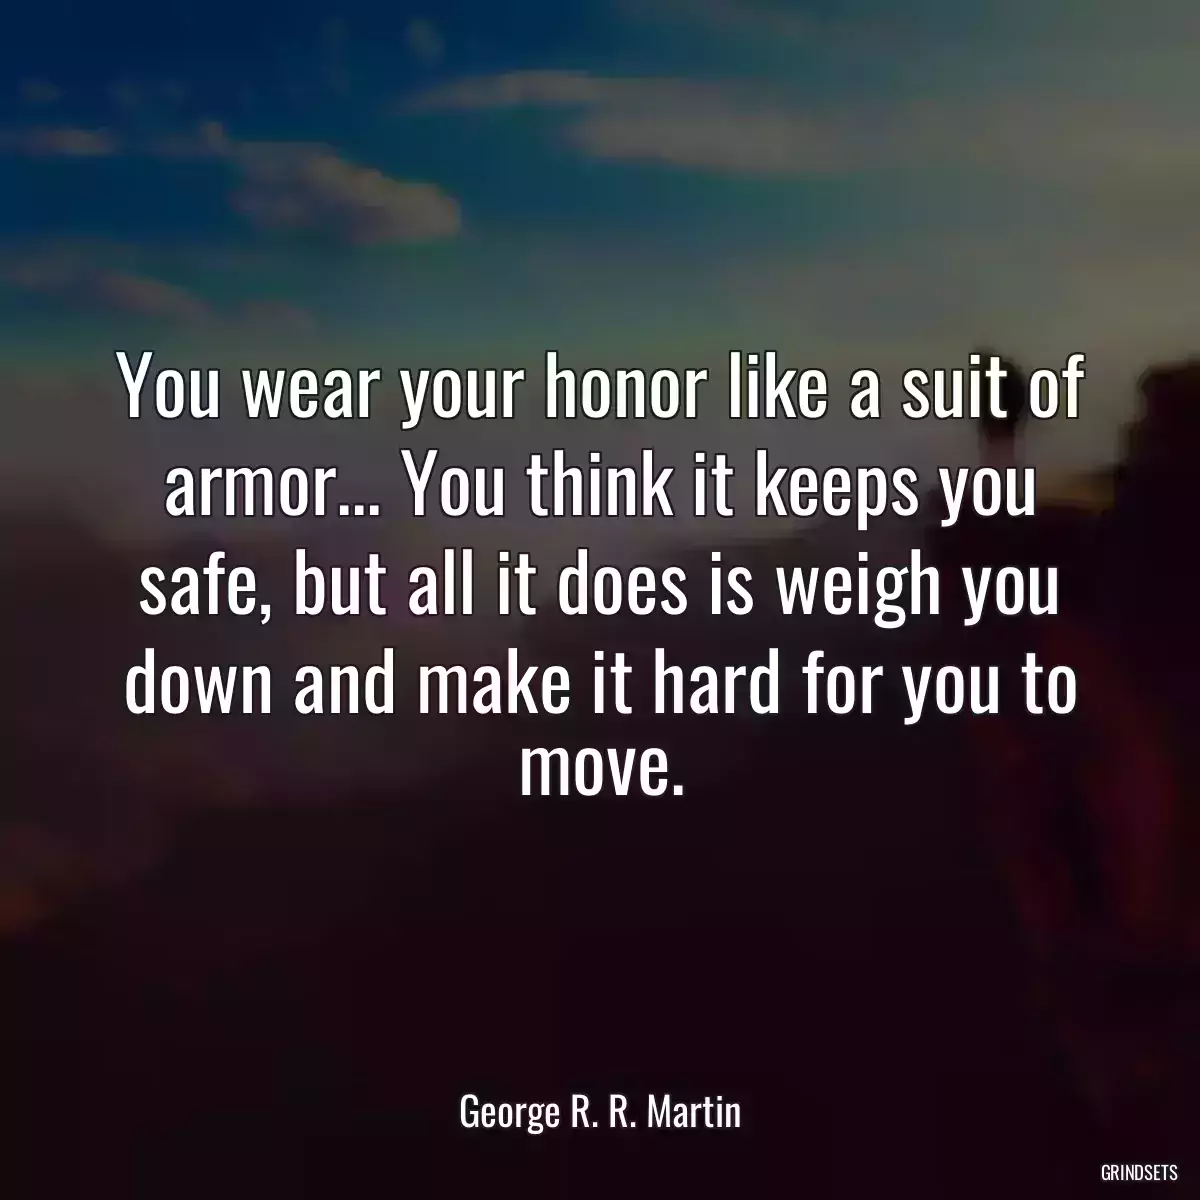 You wear your honor like a suit of armor... You think it keeps you safe, but all it does is weigh you down and make it hard for you to move.